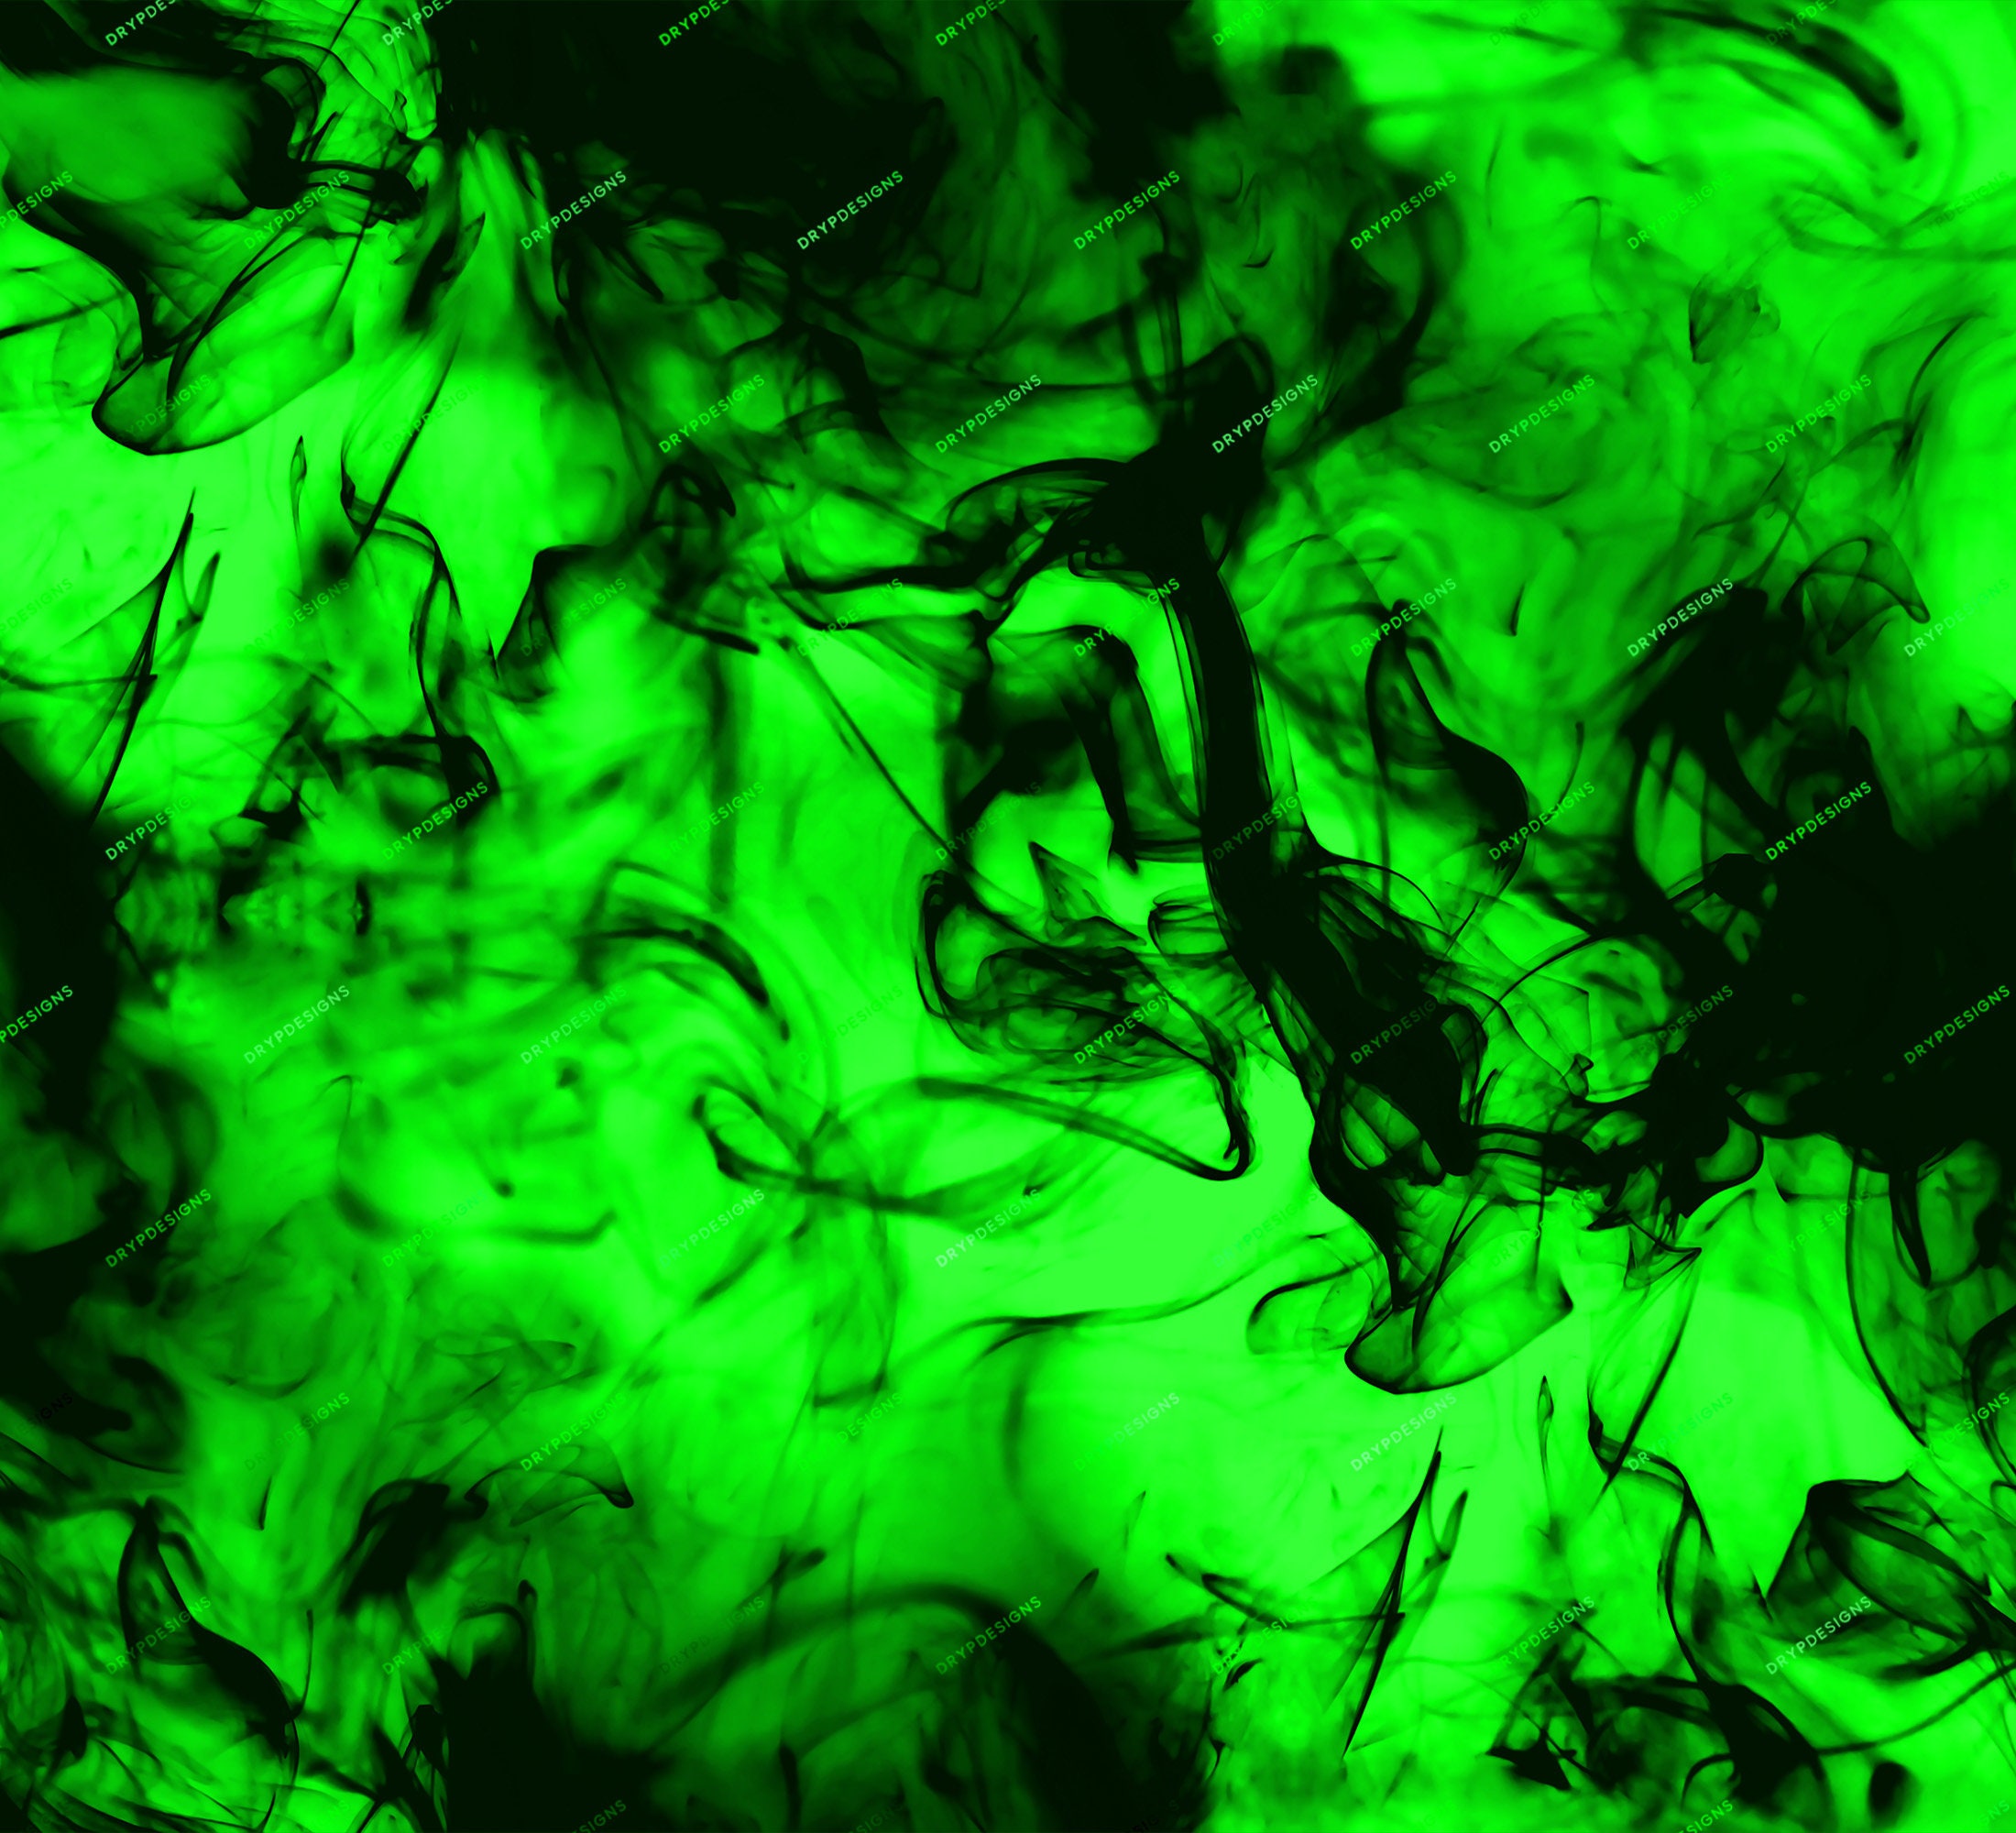 green flames backgrounds